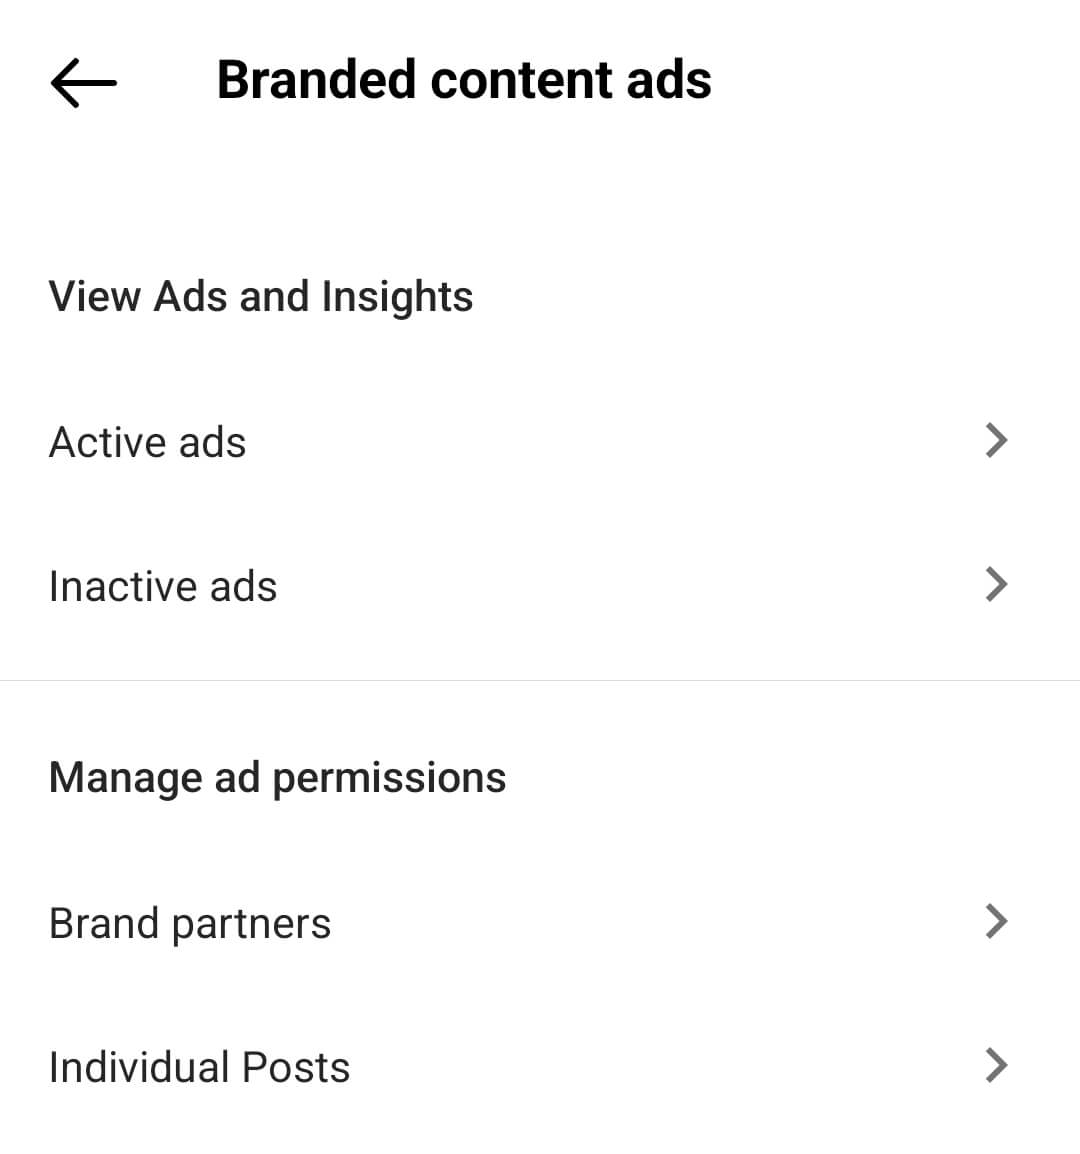 how-to-amplify-influencer-promo-code-posts-with-branded-content-ads-on-instagram-brand-partners-tab-add-companys-instagram-account-permission-to-turn-content-into-ad-example-13